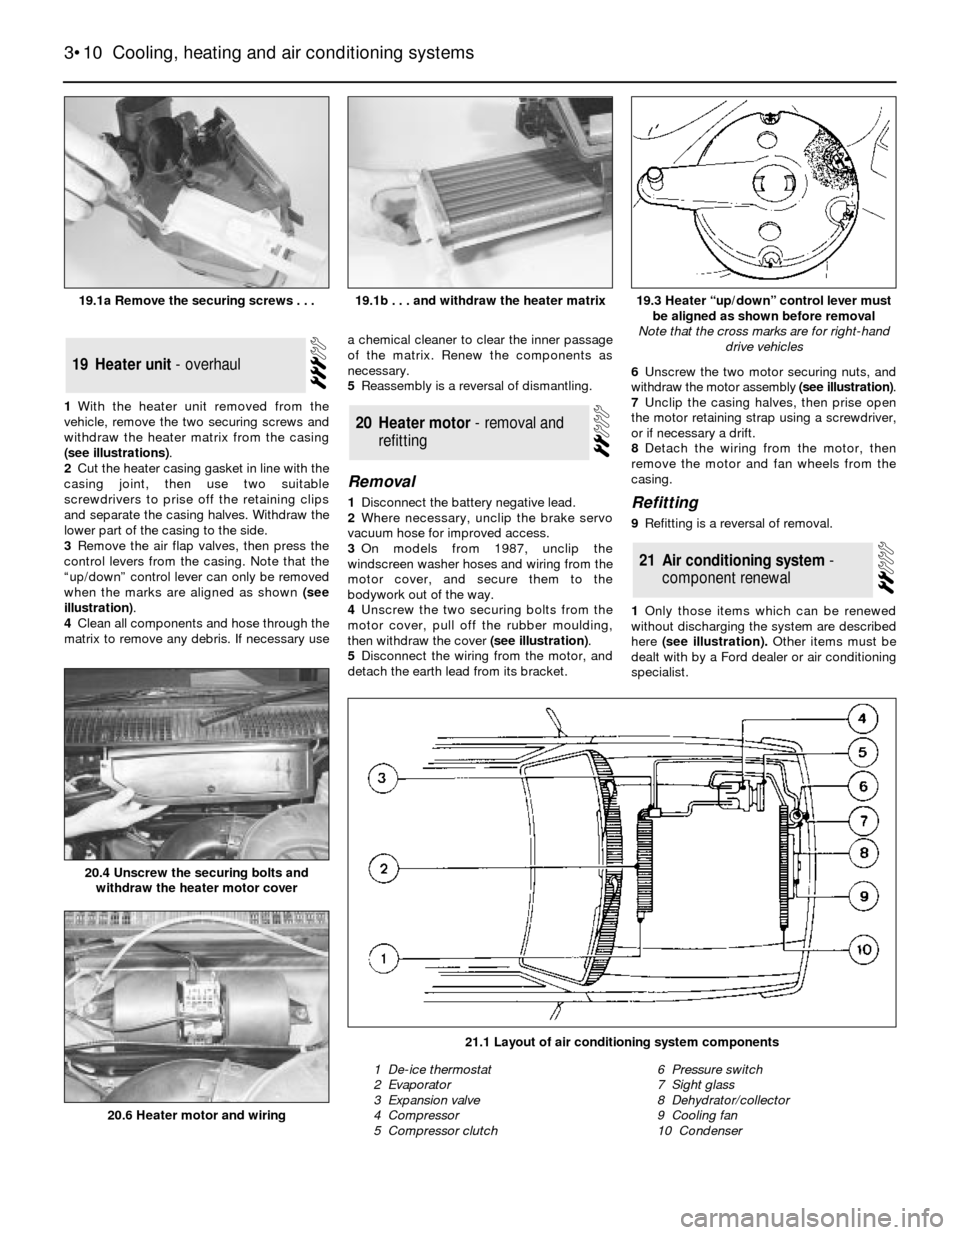 FORD SIERRA 1987 2.G Cooling And Air Conditioning Systems Workshop Manual 1With the heater unit removed from the
vehicle, remove the two securing screws and
withdraw the heater matrix from the casing
(see illustrations).
2Cut the heater casing gasket in line with the
casing